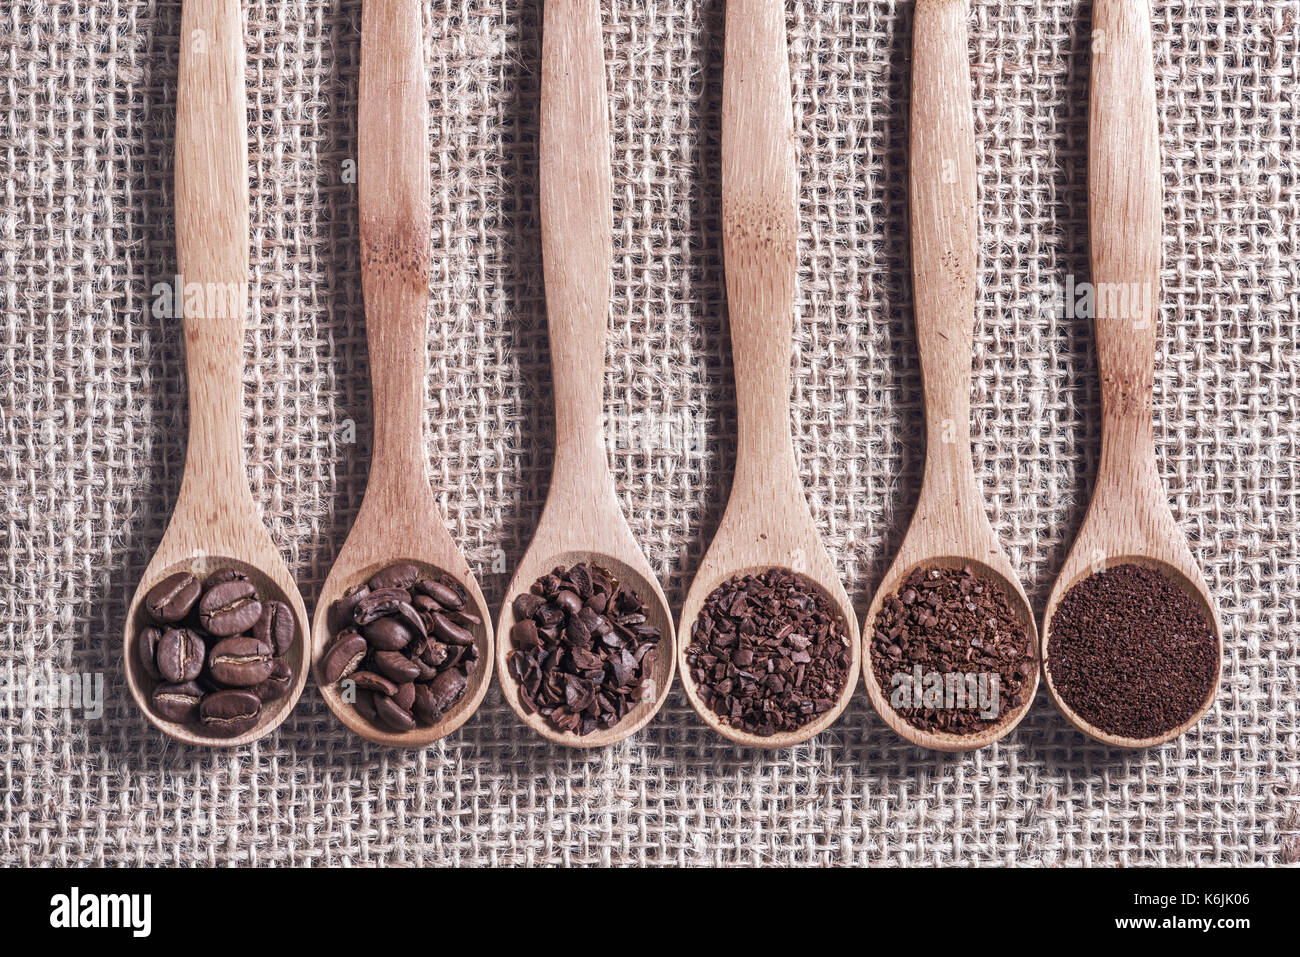 Roasted coffee beans. Spoons with coffee showing the grinding stages. Stock Photo